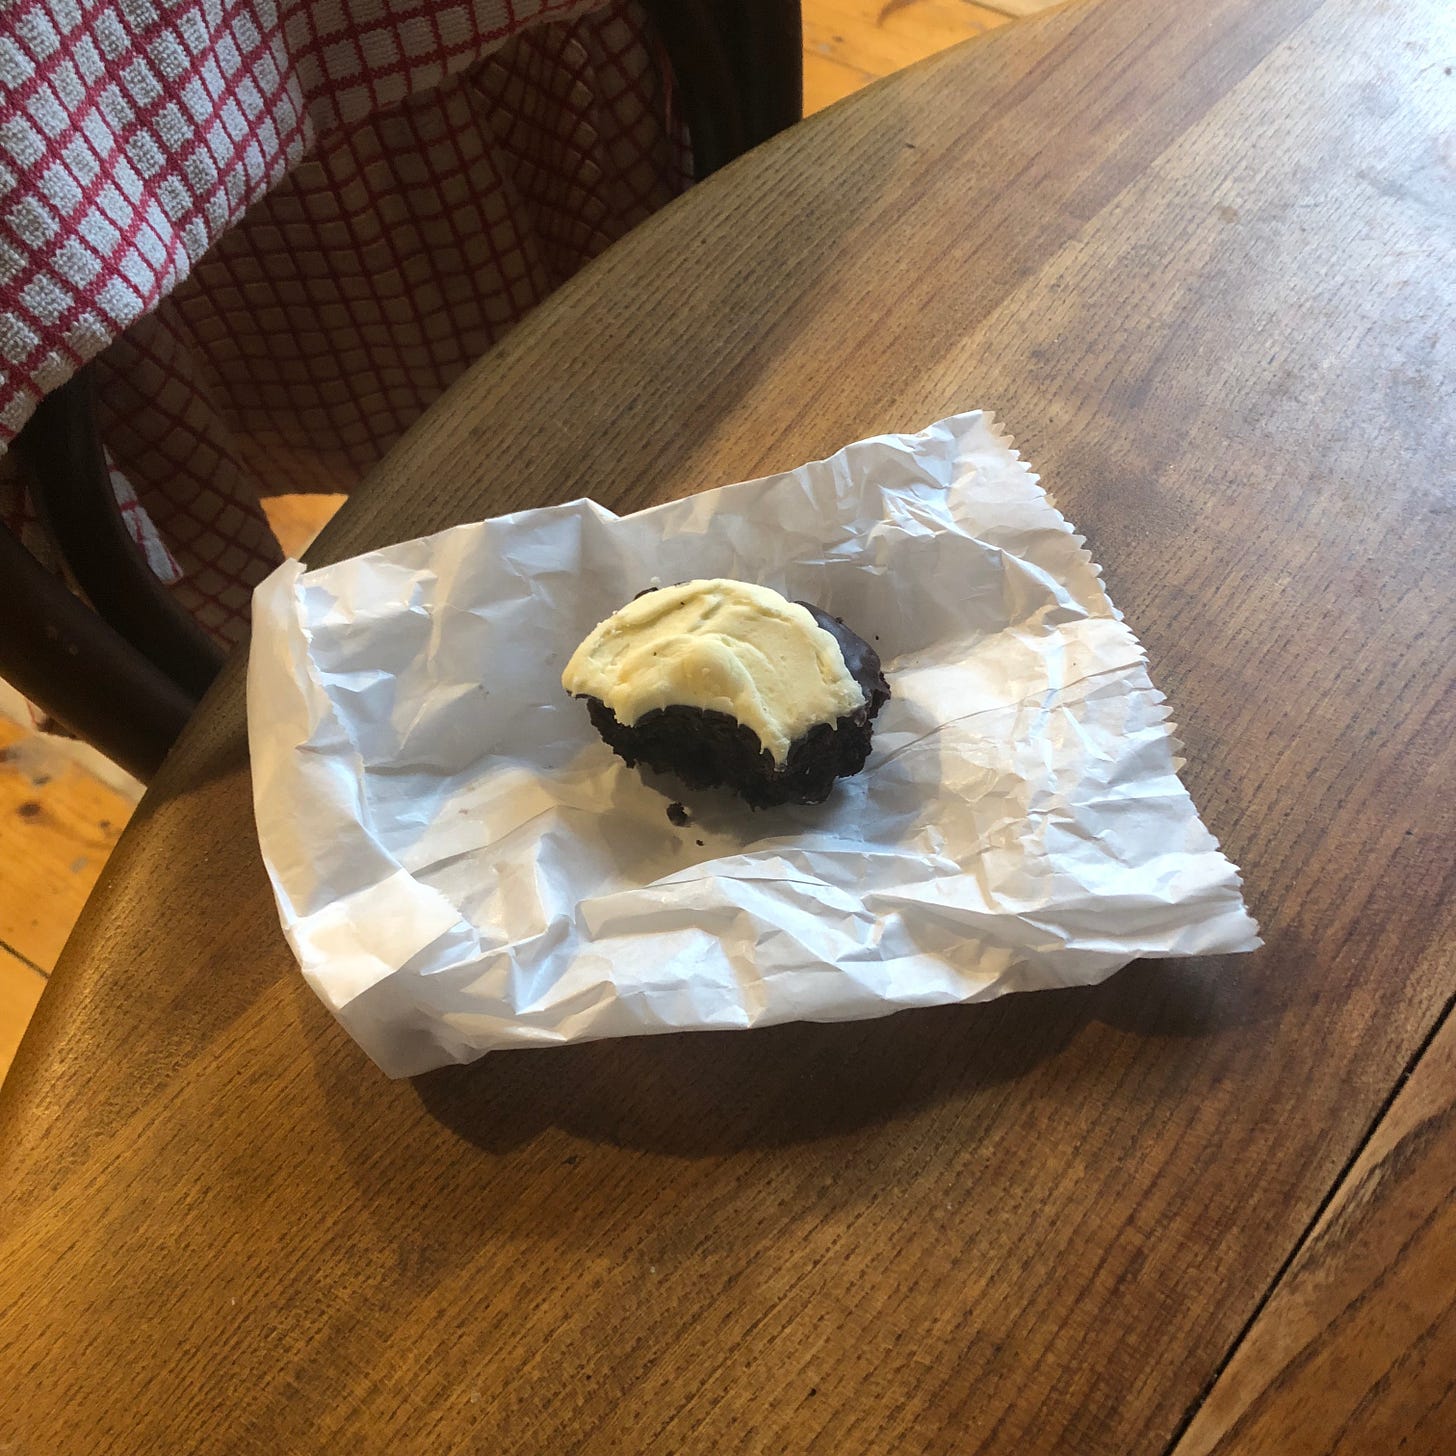  A photo of a half eaten chocolate brown cookie with white icing, laid atop a crinkled white paper bag. This sits on a brown wooden table, with a red and white gridded tea towel in the top left corner, resting against the back of a chair. 